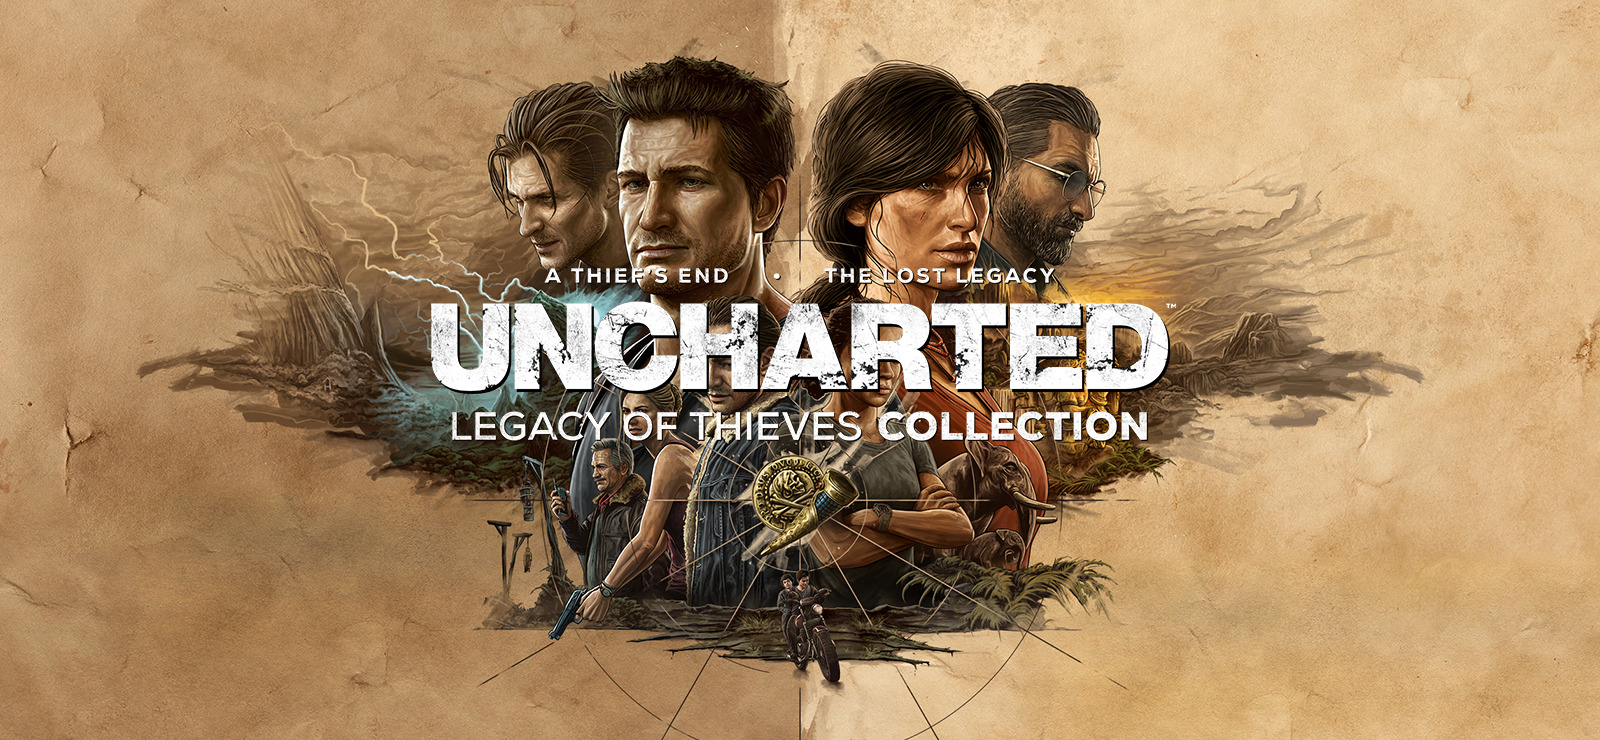 Jogo Uncharted: Legacy Of Thieves Collection - PC Gog